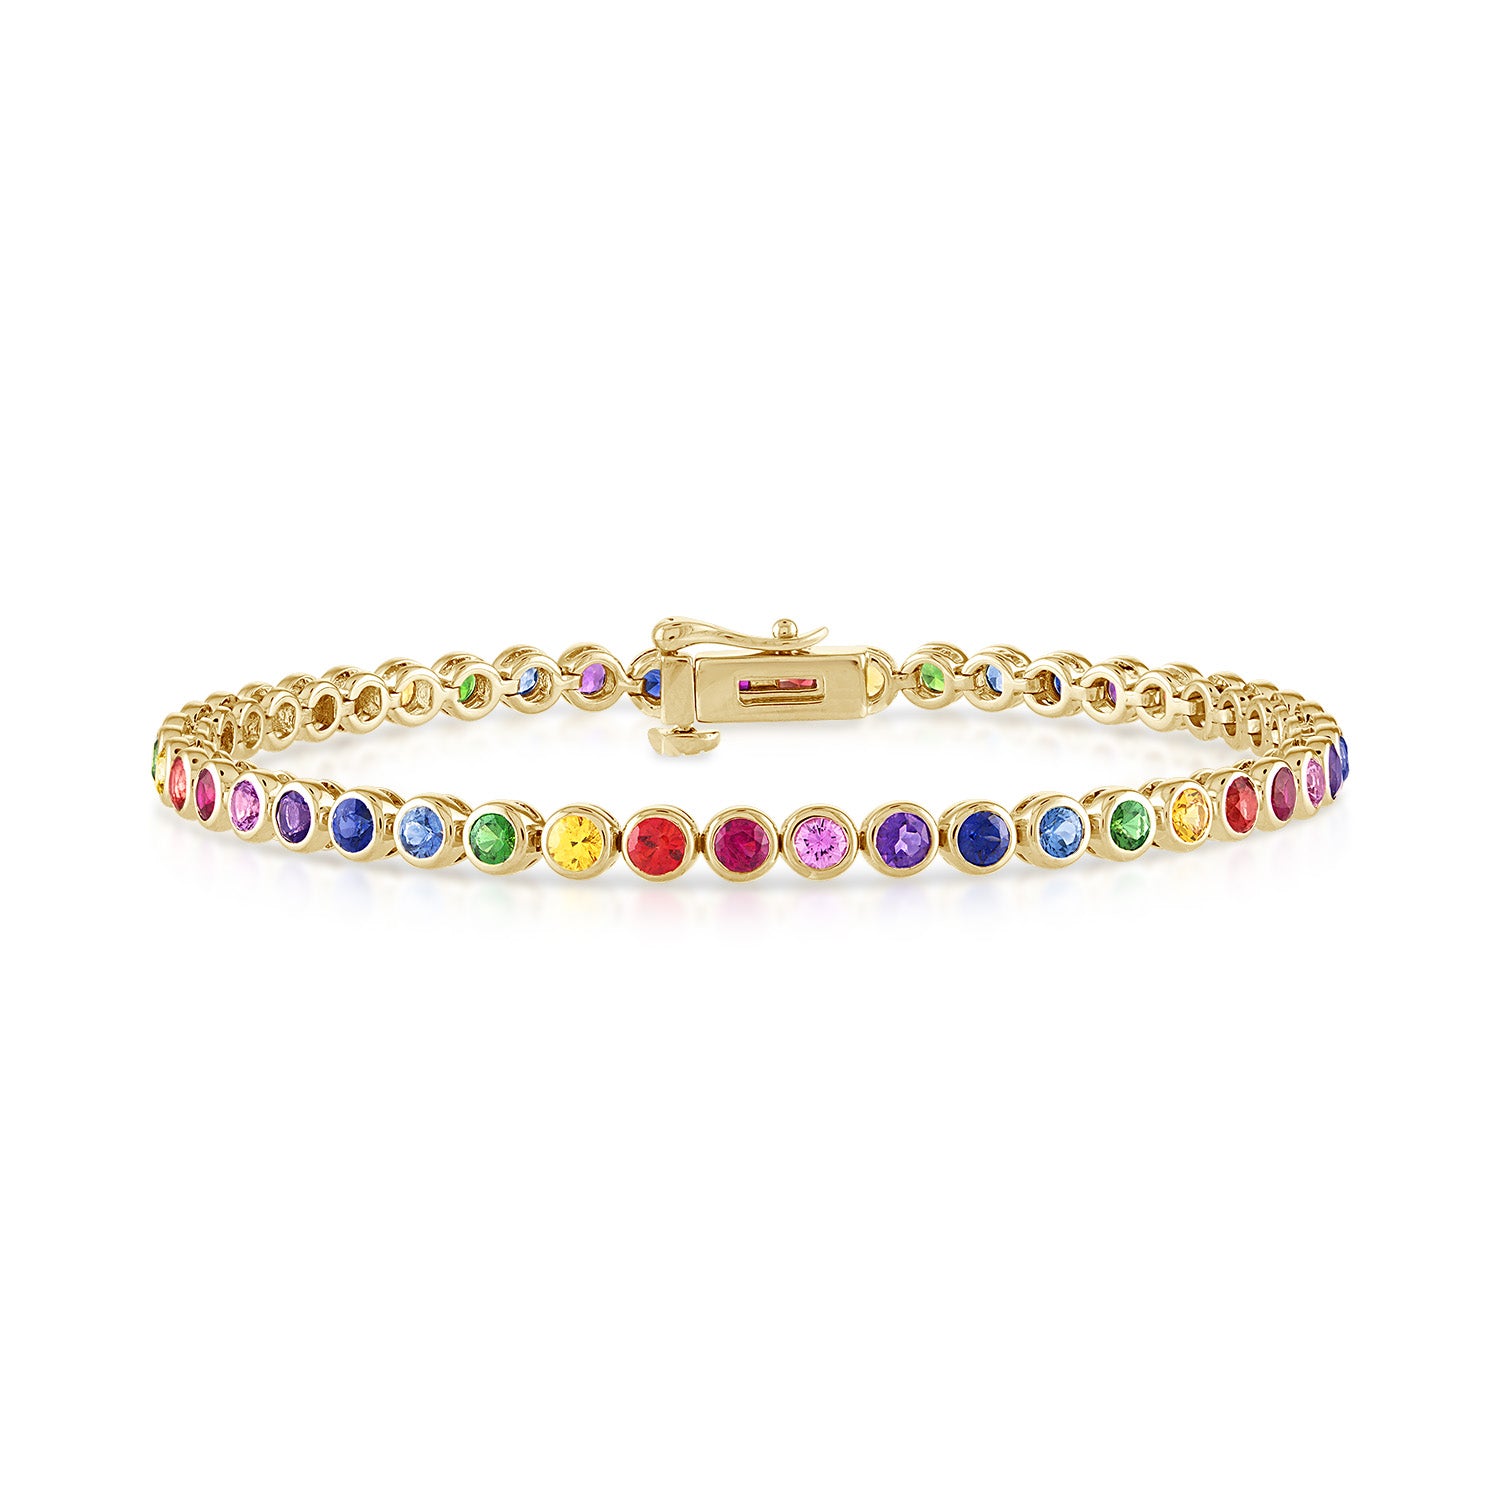 14k yellow gold rainbow bezel set tennis bracelet in 3.45 carats and clasped